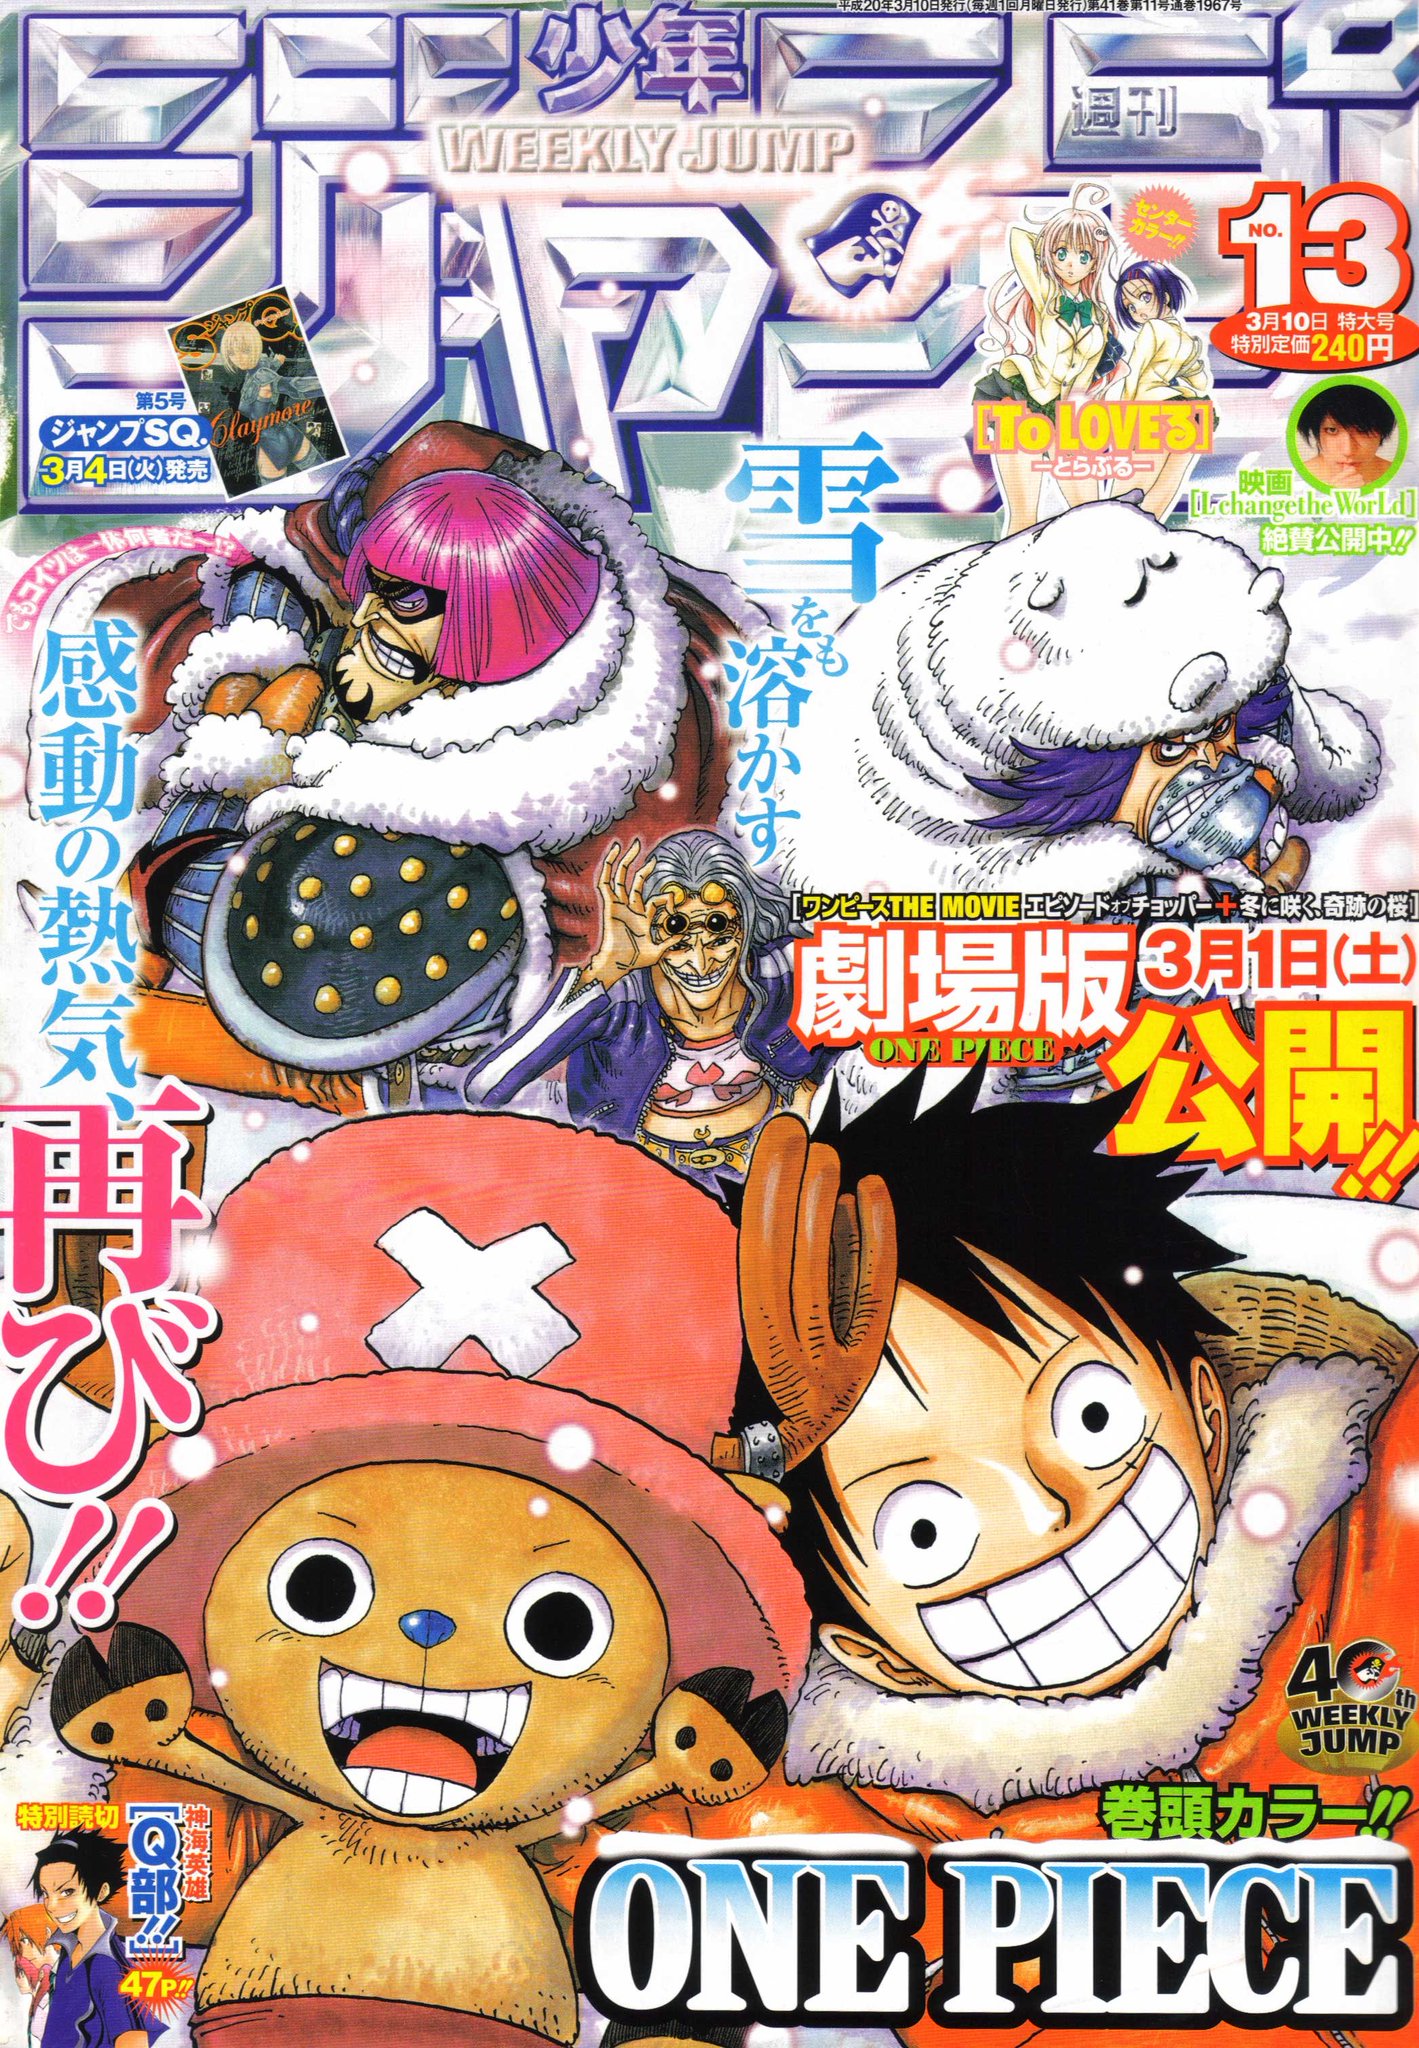 Shonen Jump Covers Check Pinned 08 No 13 Cover One Piece By Eiichiro Oda T Co 2afhkqb9nj Twitter